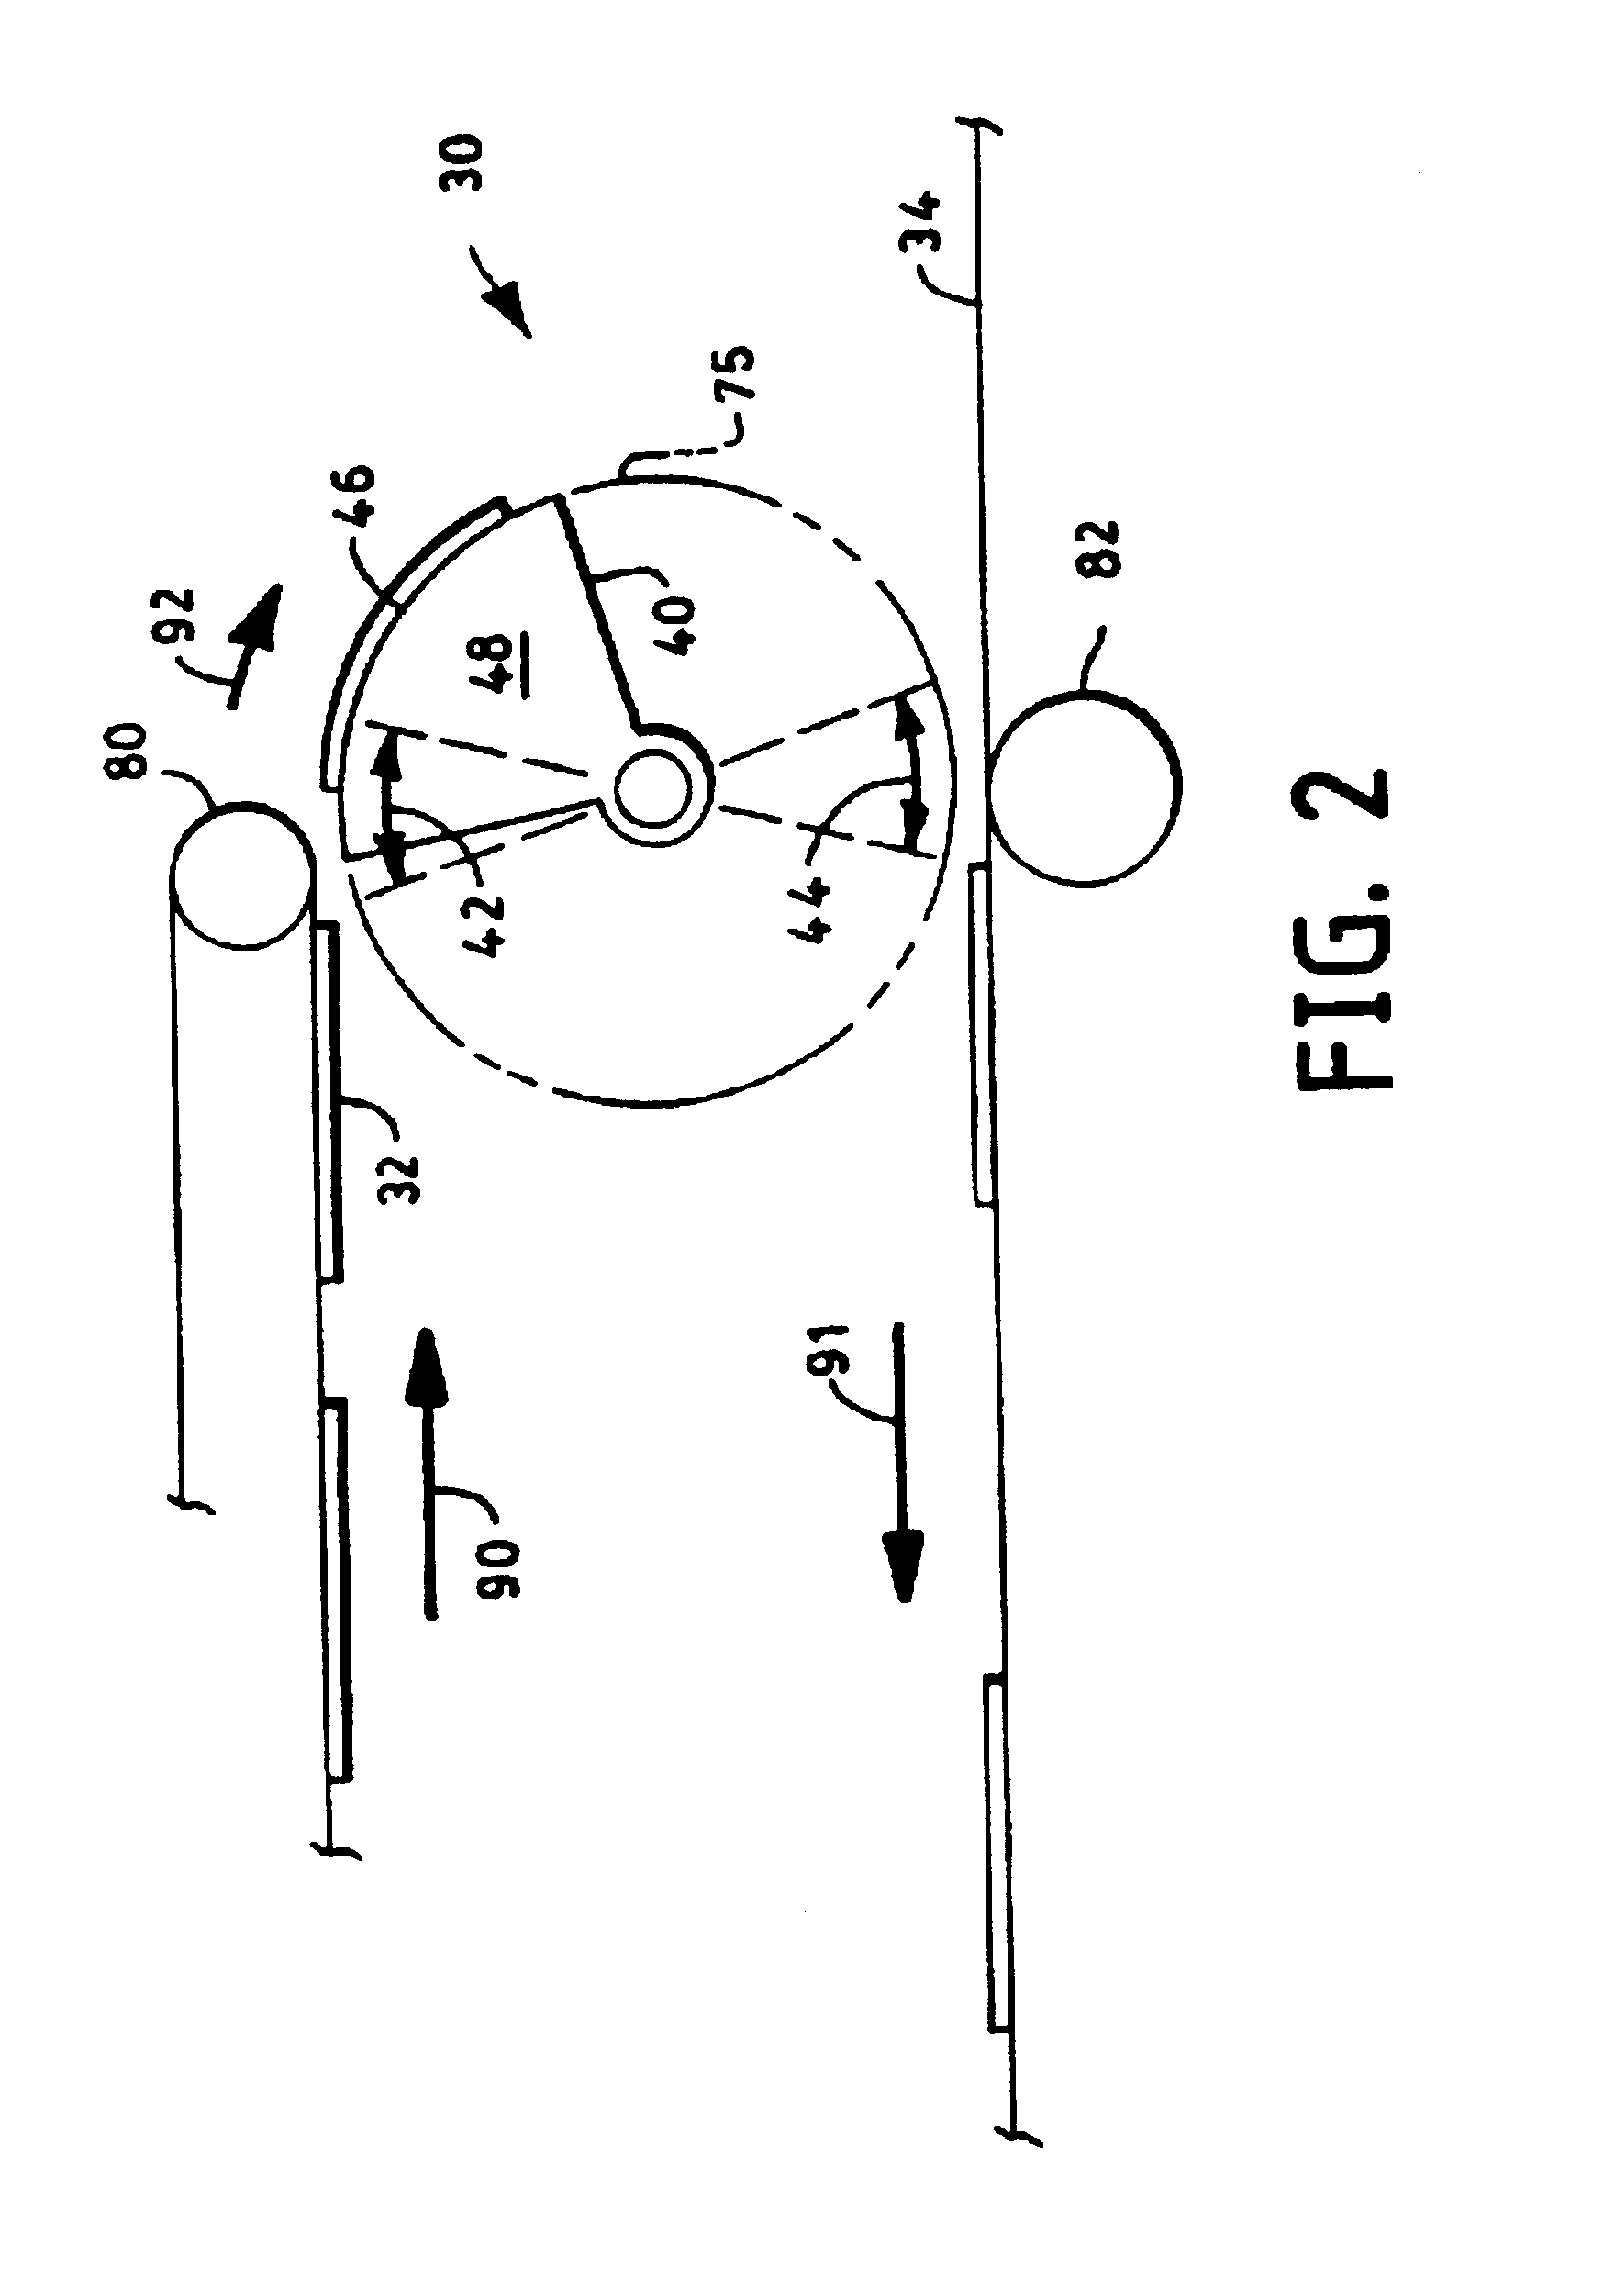 Method and apparatus for placing discrete parts transversely onto a moving web